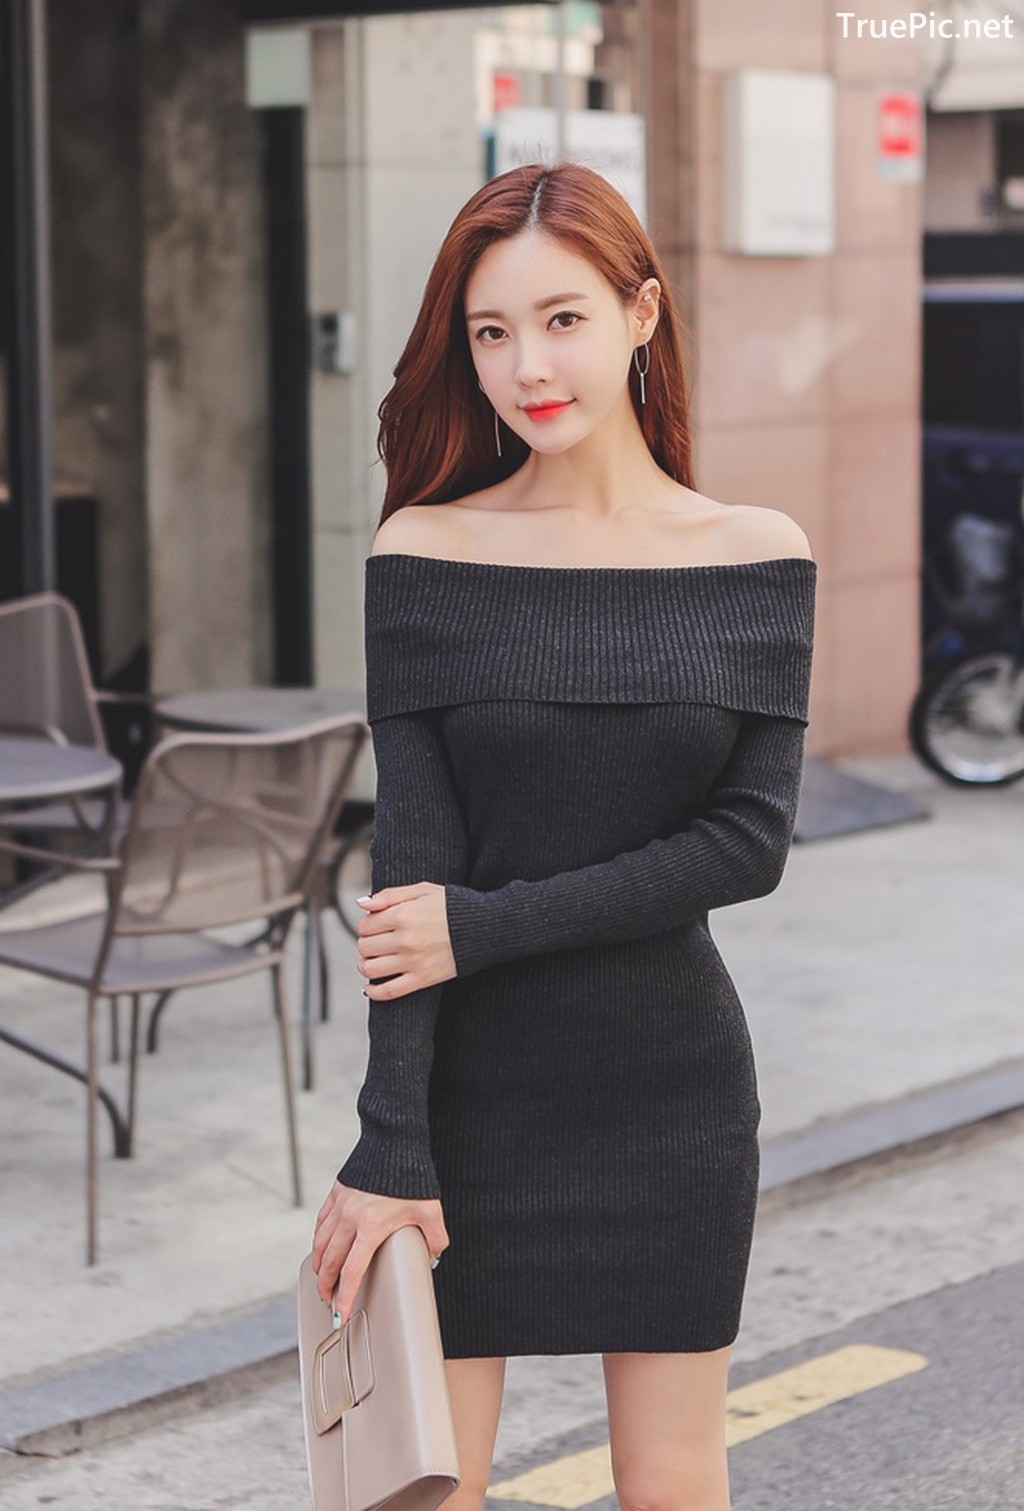 Image Korean Fashion Model - Hyemi - Office Dress Collection - TruePic.net - Picture-18